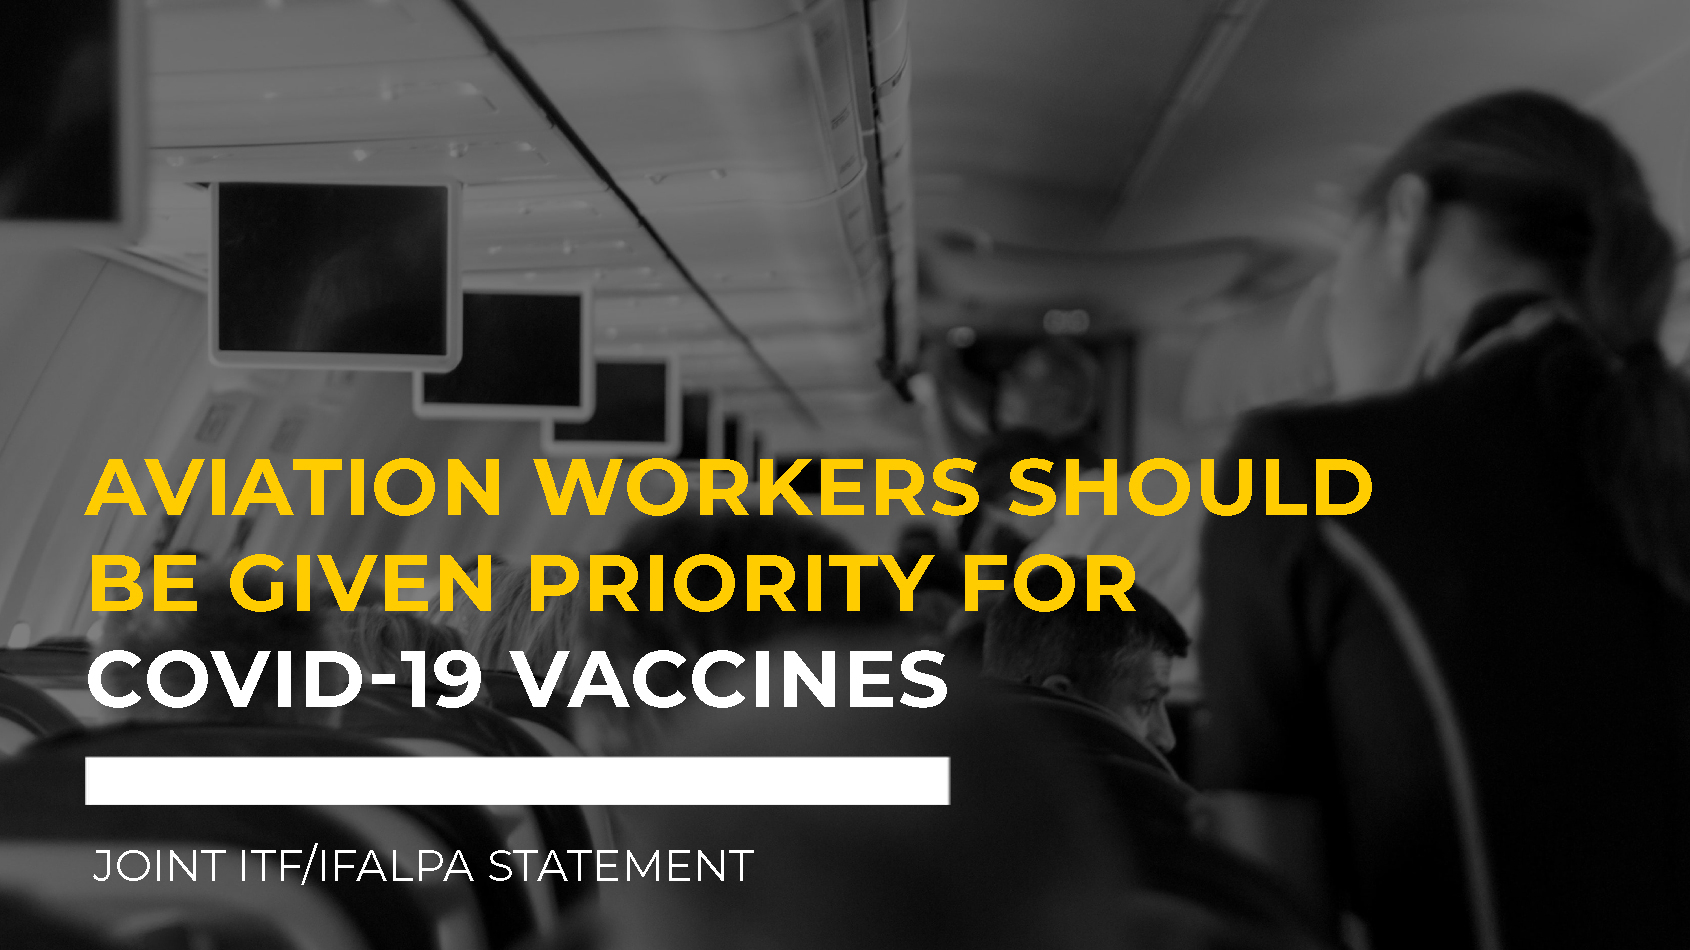 Aviation workers should be given priority for COVID-19 vaccines